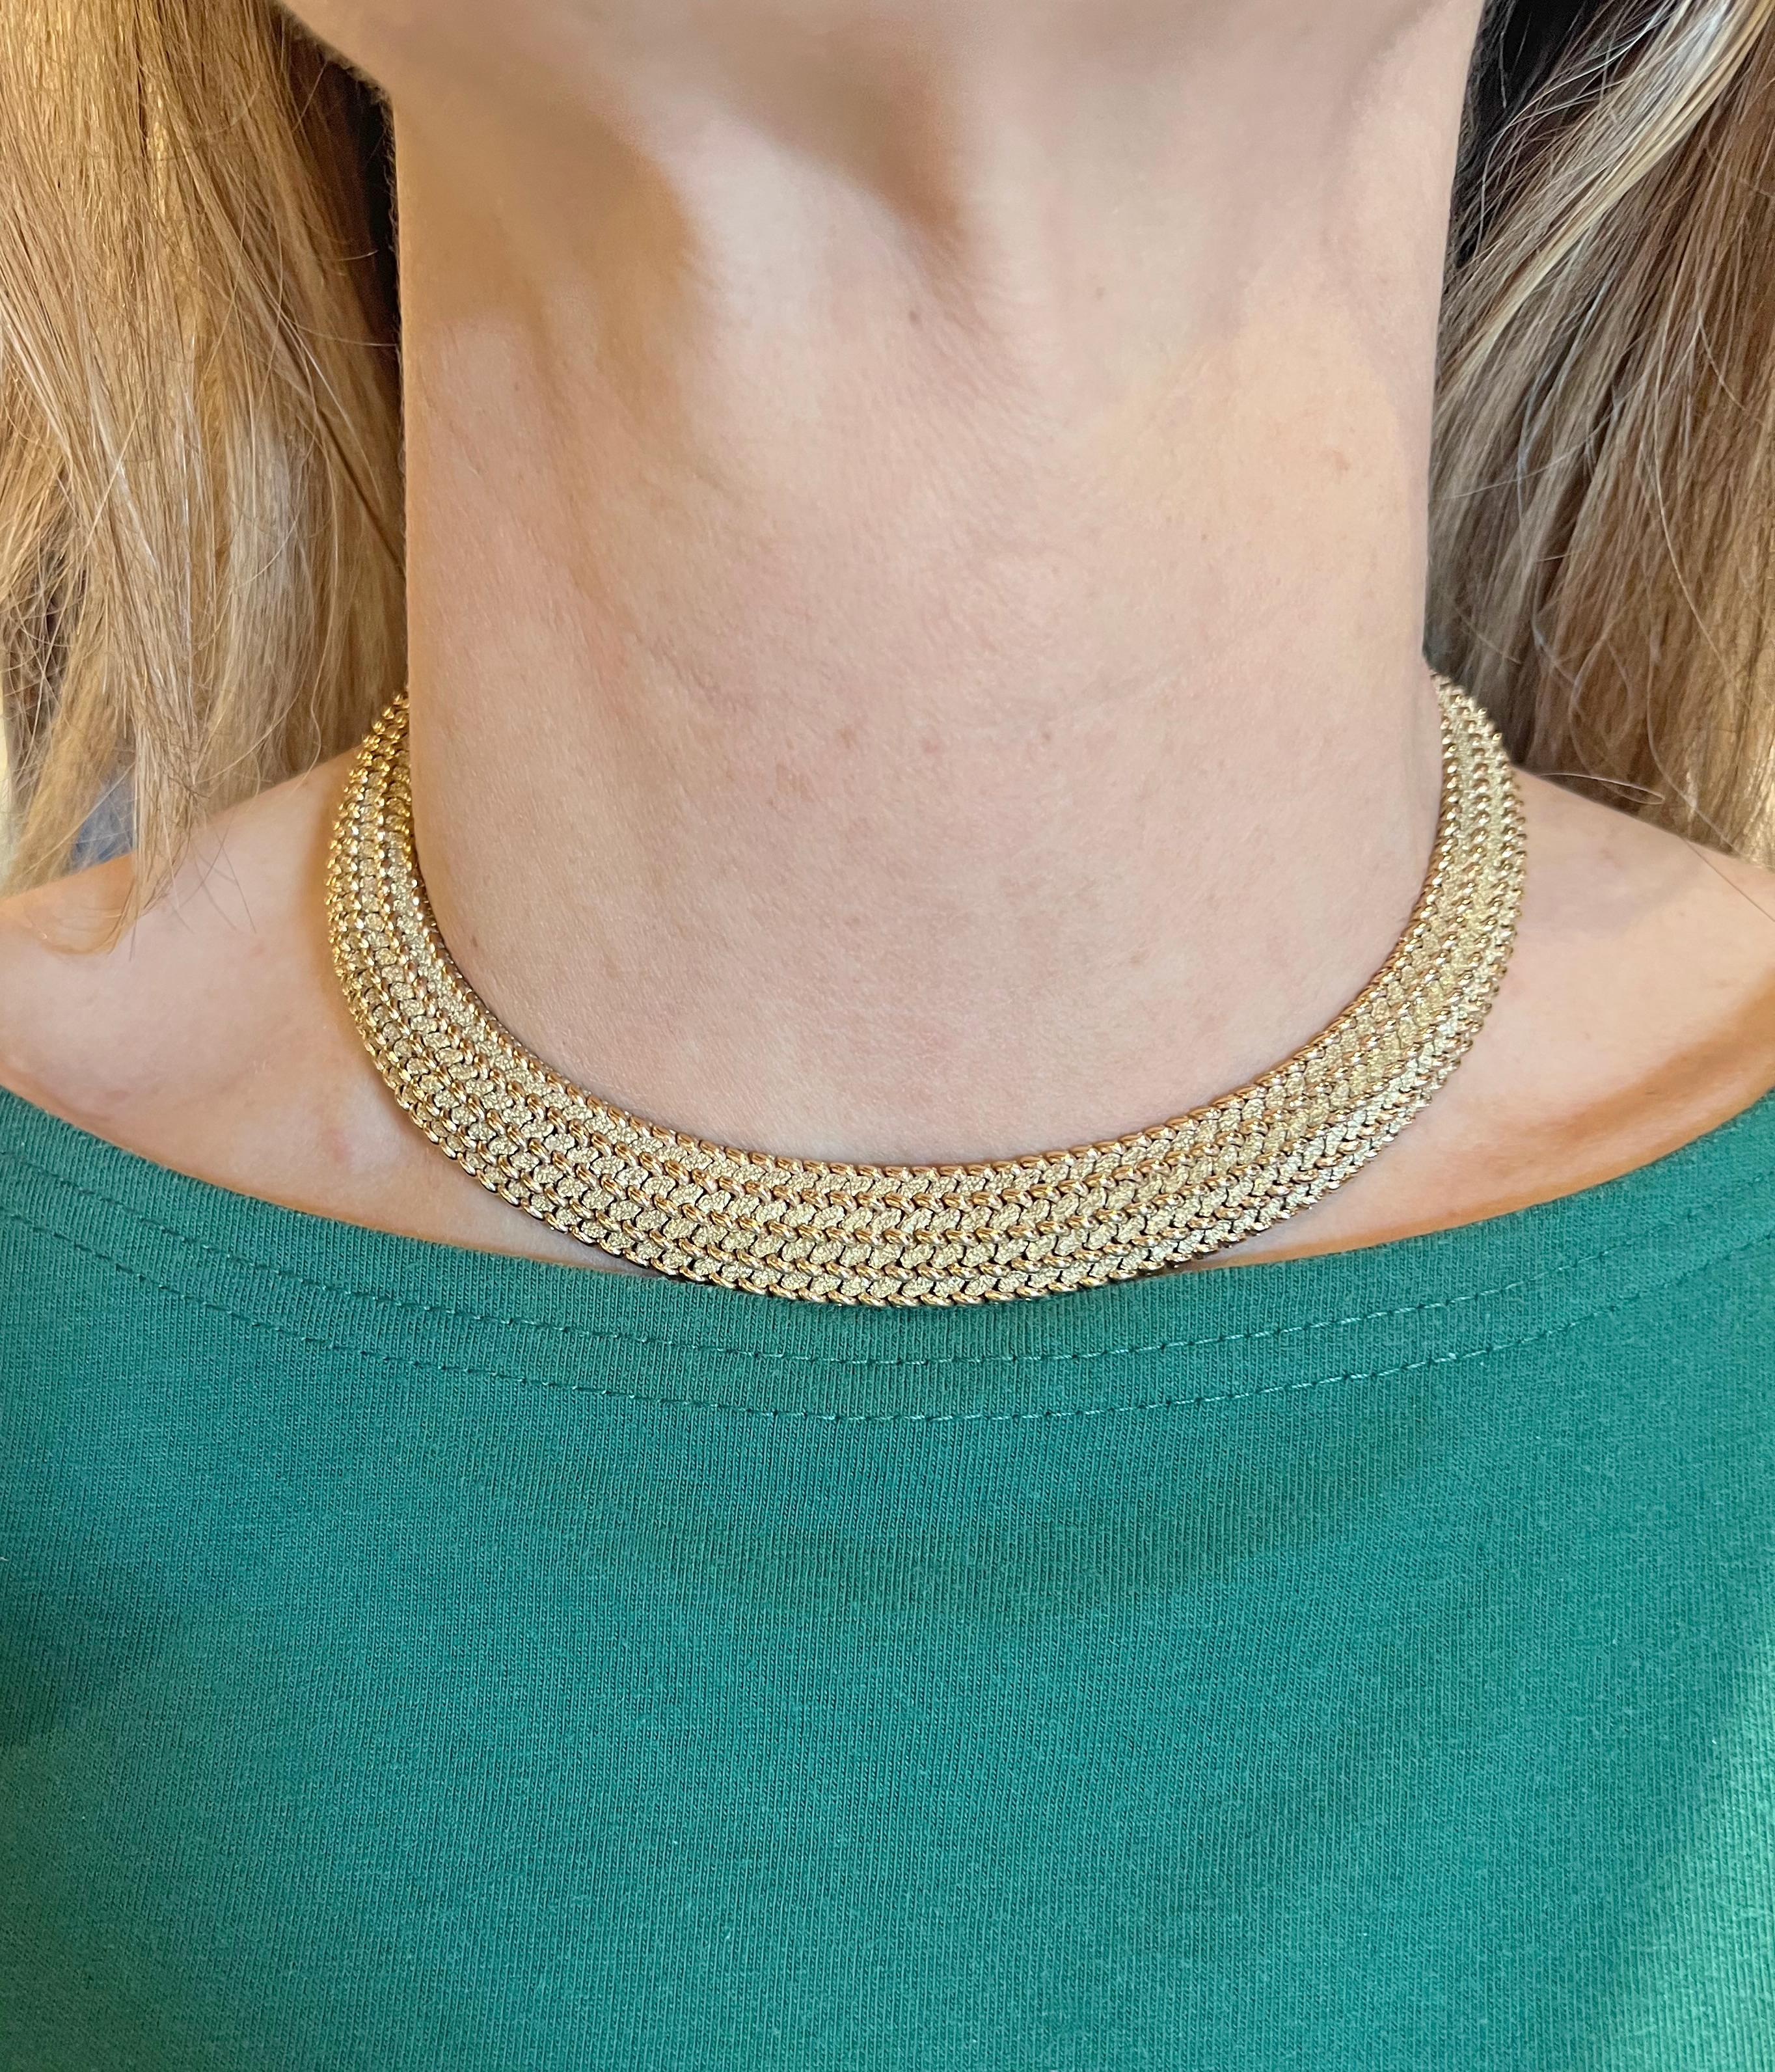 Woven 14k yellow gold mesh collar necklace, featuring a curved design with five rows of raised polished beaded accents with a textured finish in between.  Signed 'TIFFANY & CO' and 'S14KS' on the tongue of clasp.  Safety latch on one side of clasp